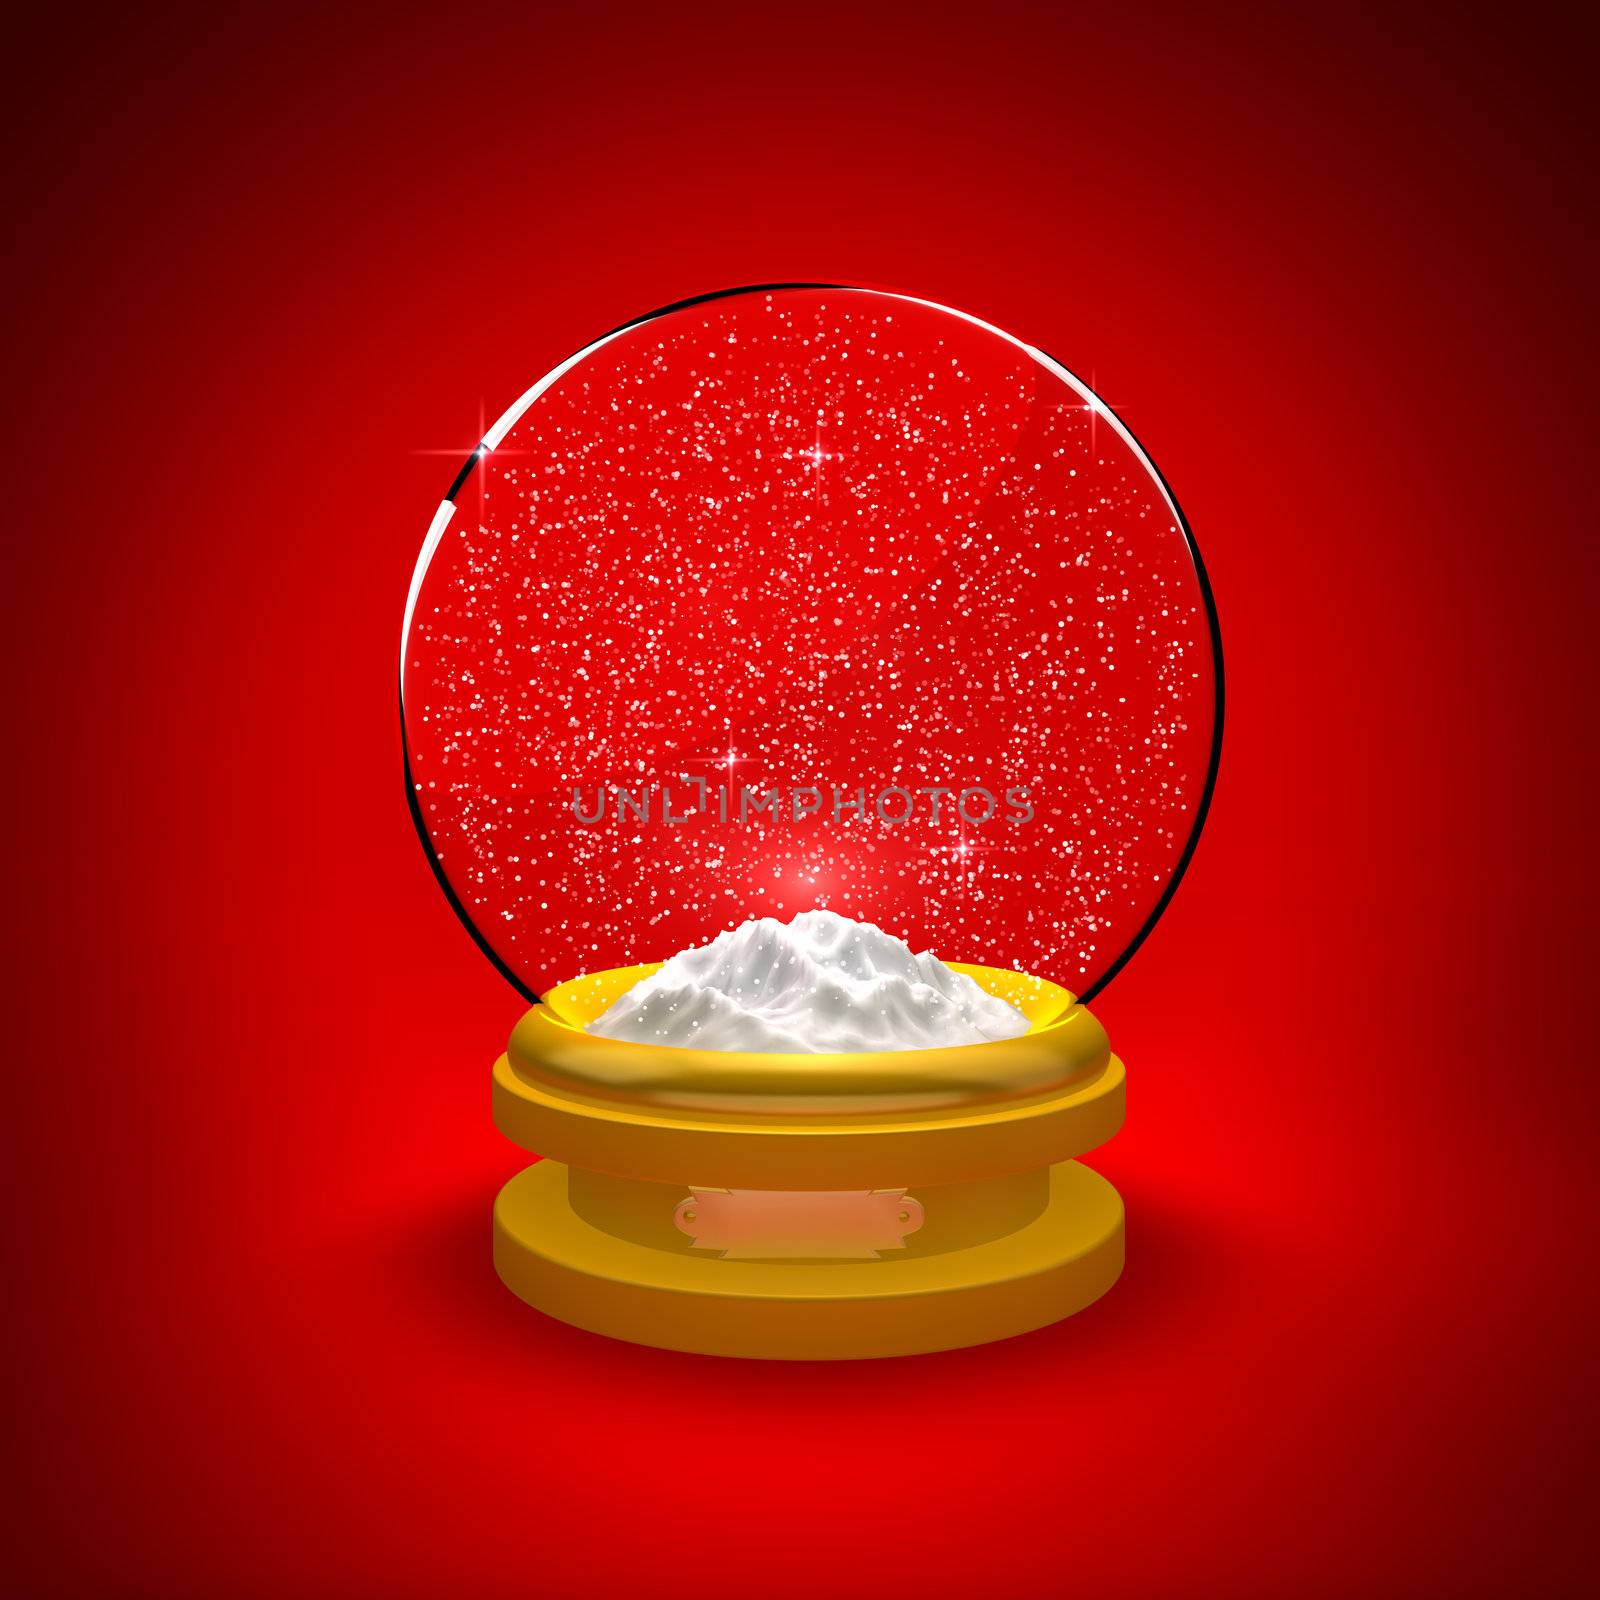 Snow globe with snow only against a red background